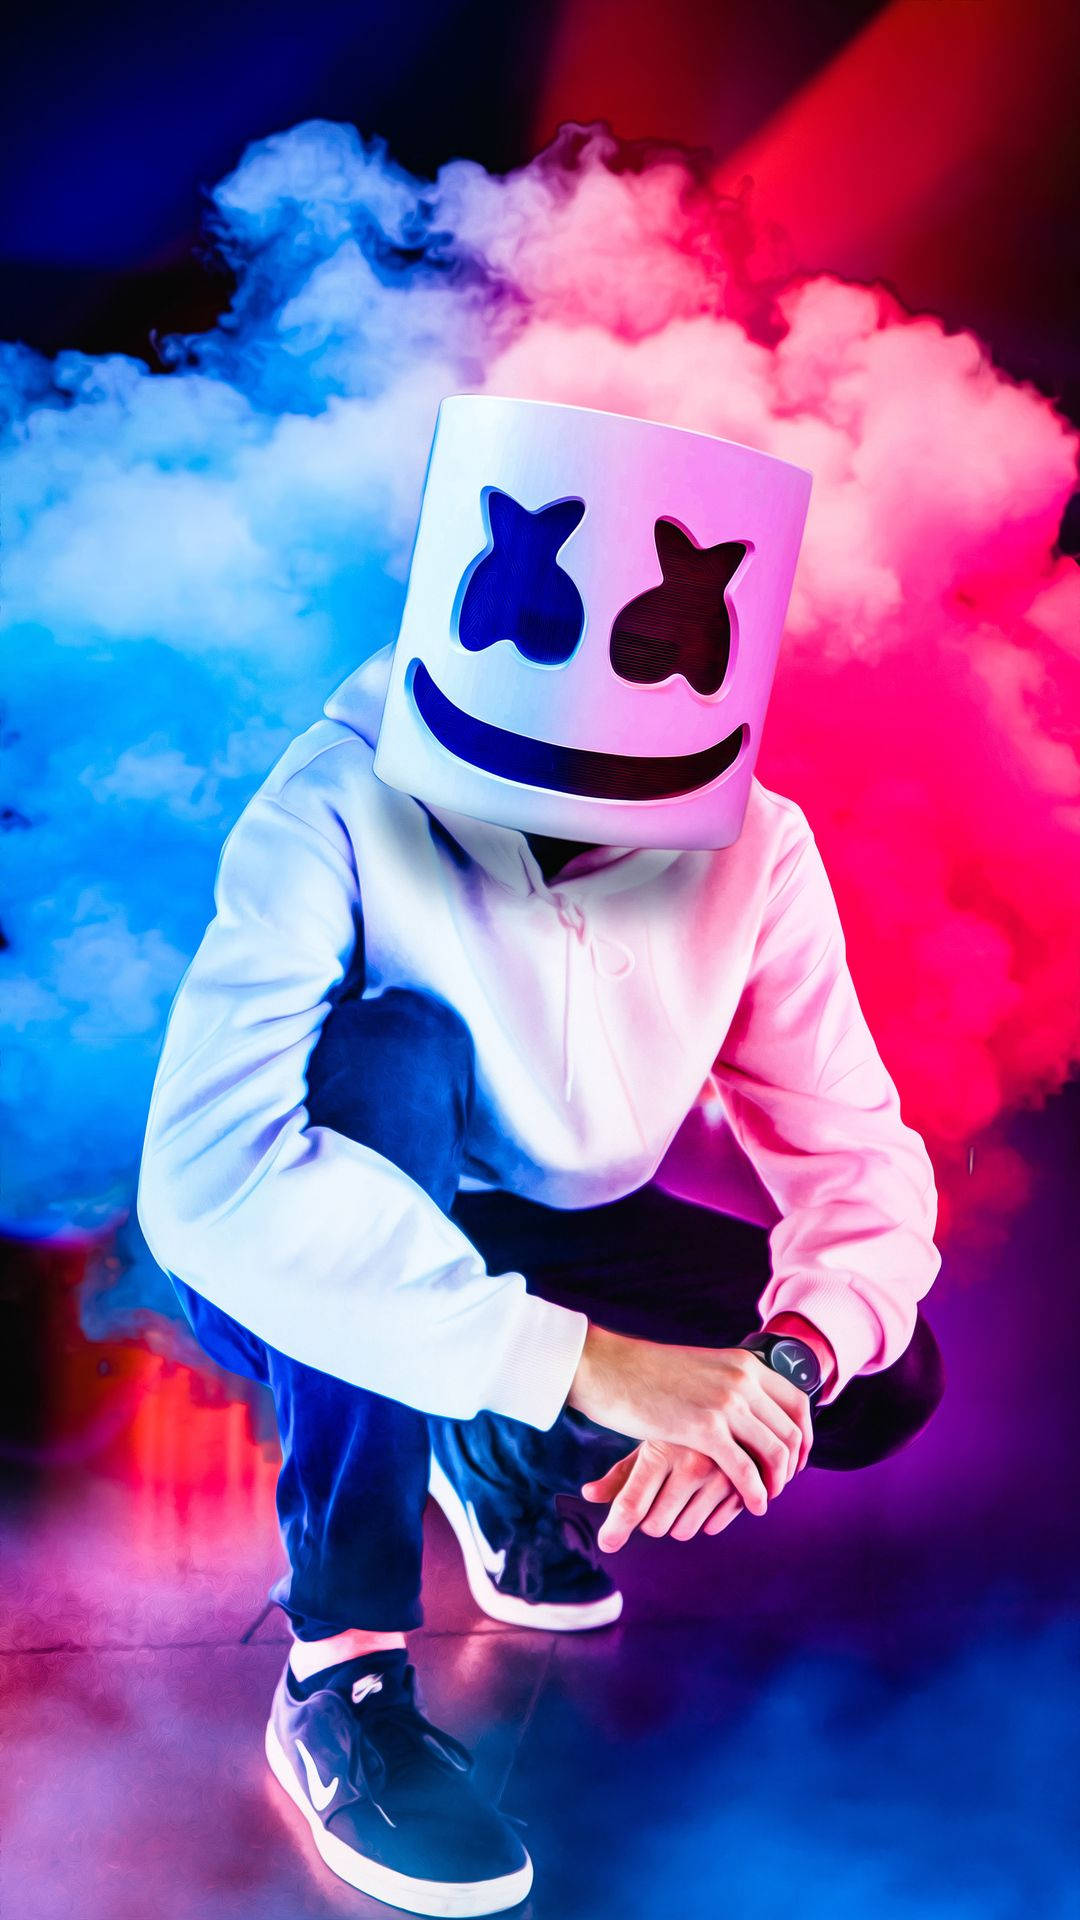 Marshmallow Dj Blue And Red Smoke Background